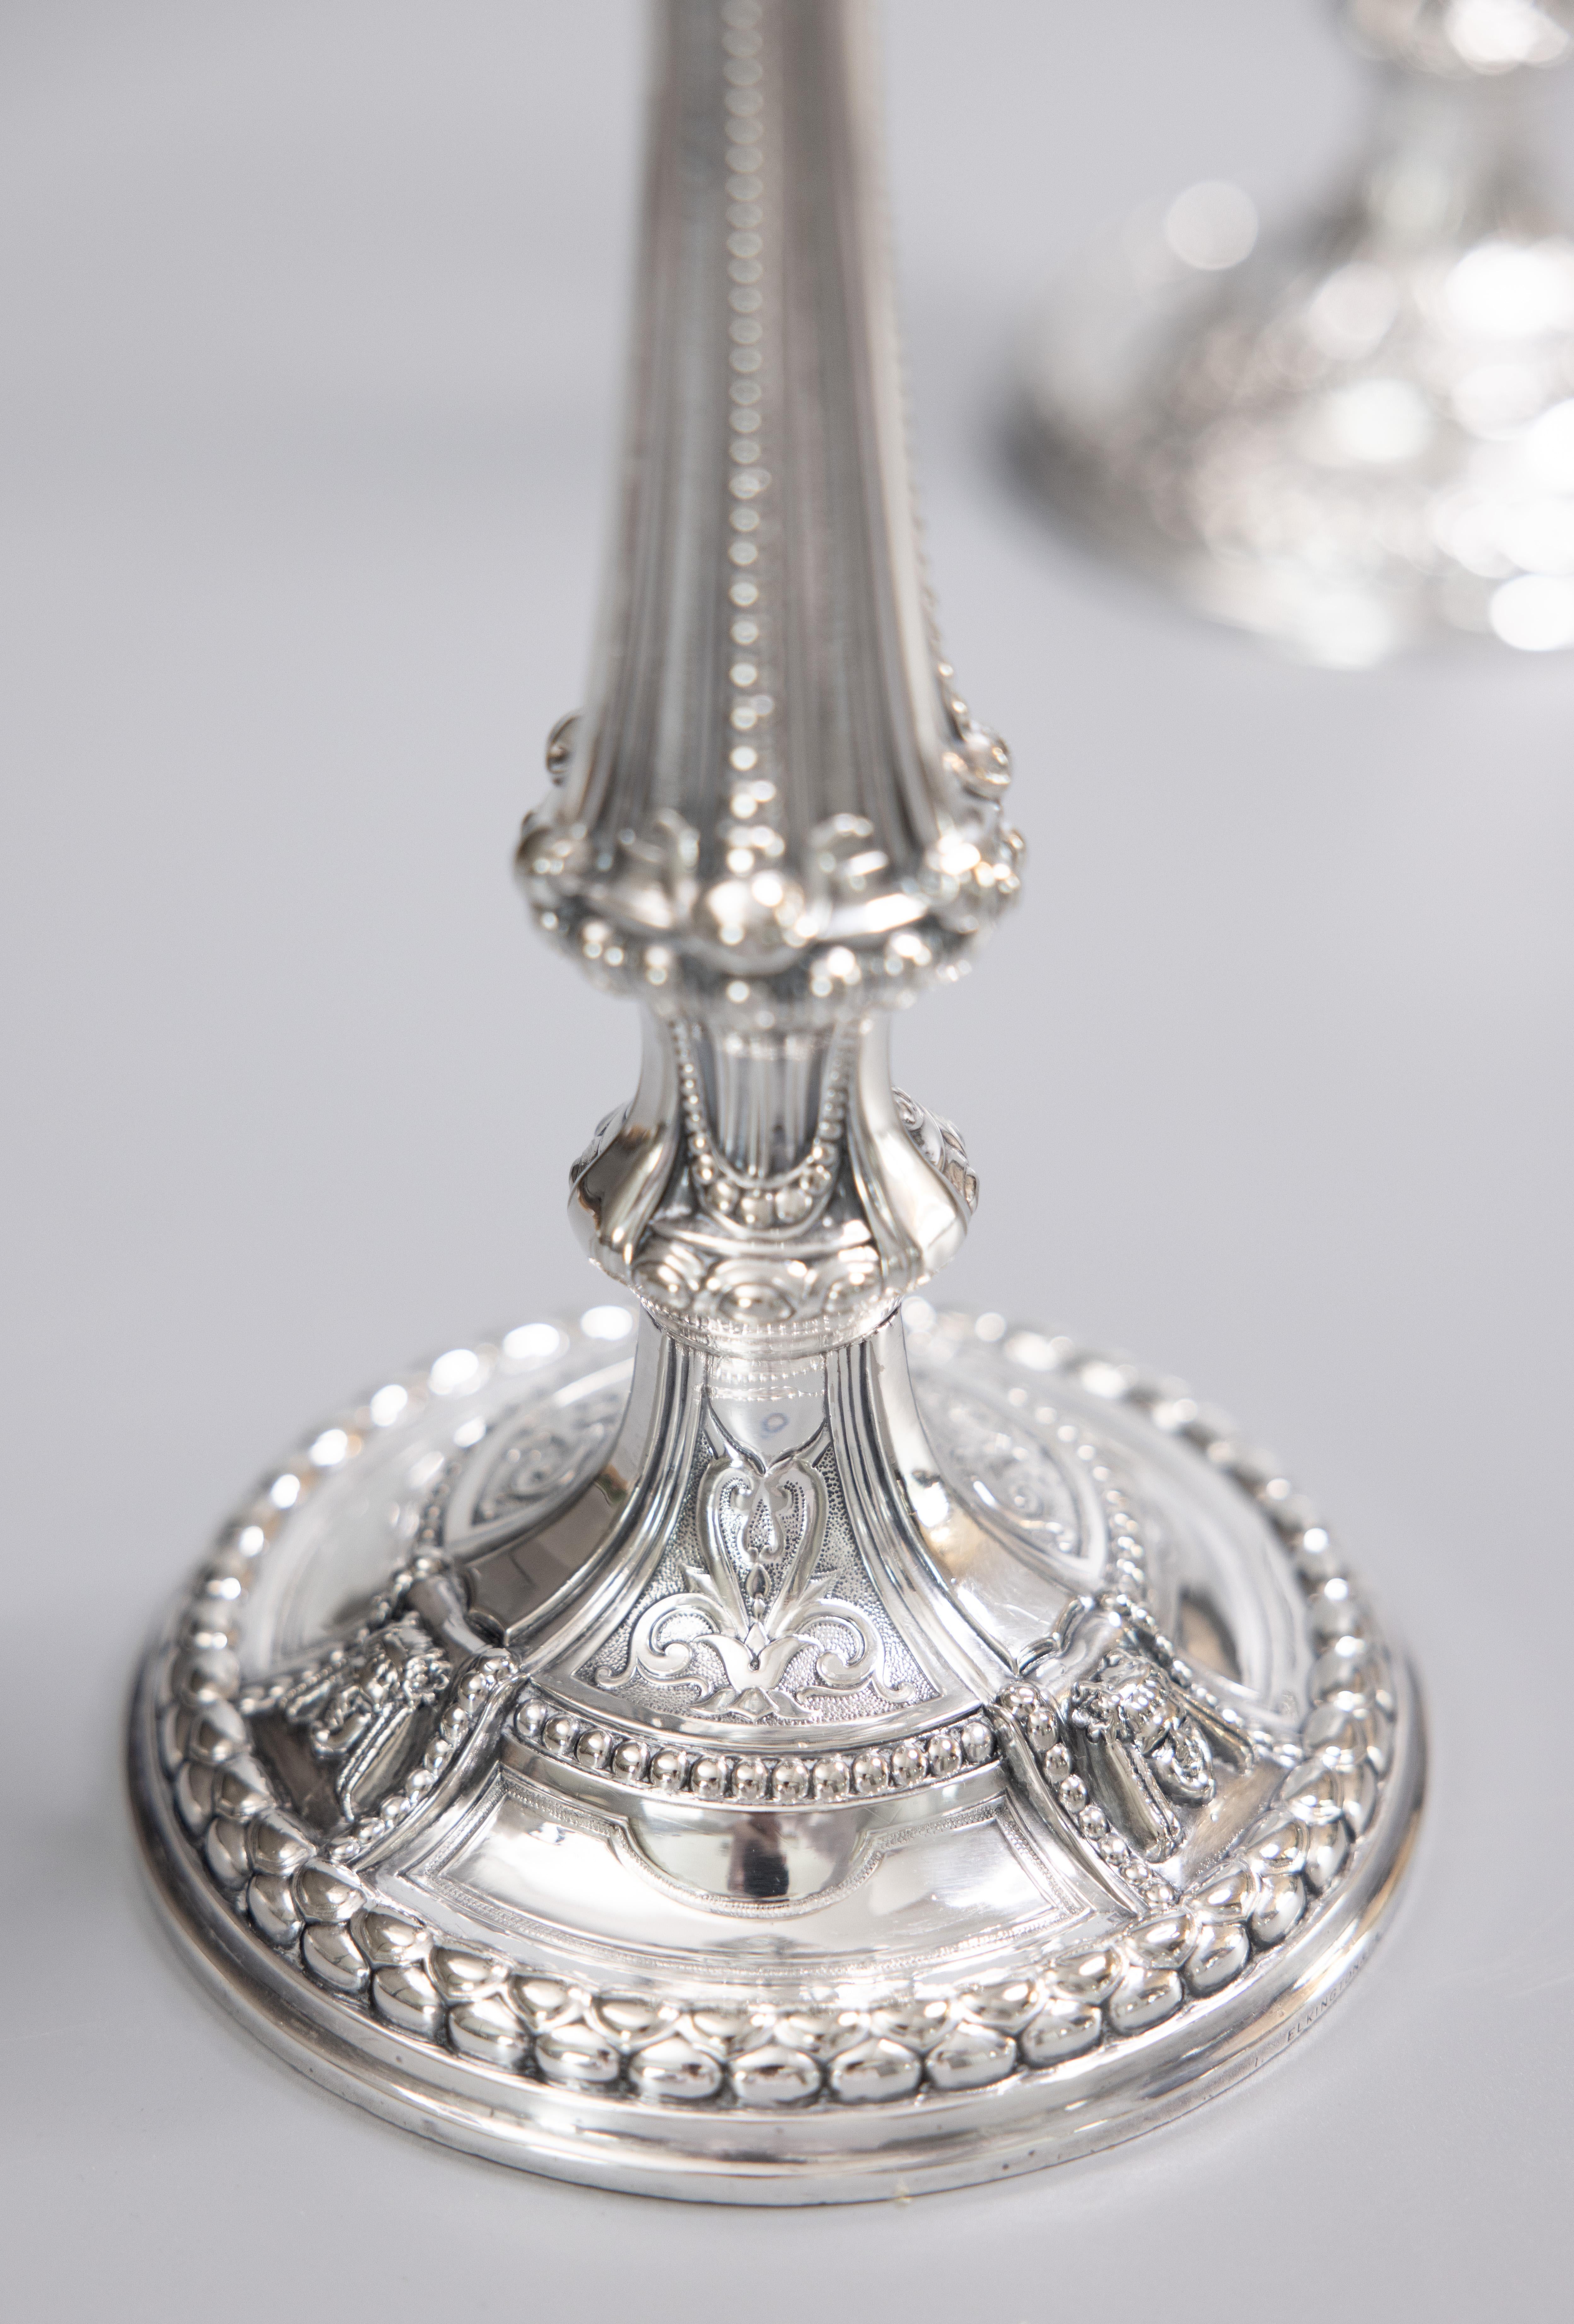 Pair of Antique English Elkington Neoclassical Silver Plate Candlesticks c. 1899 For Sale 1